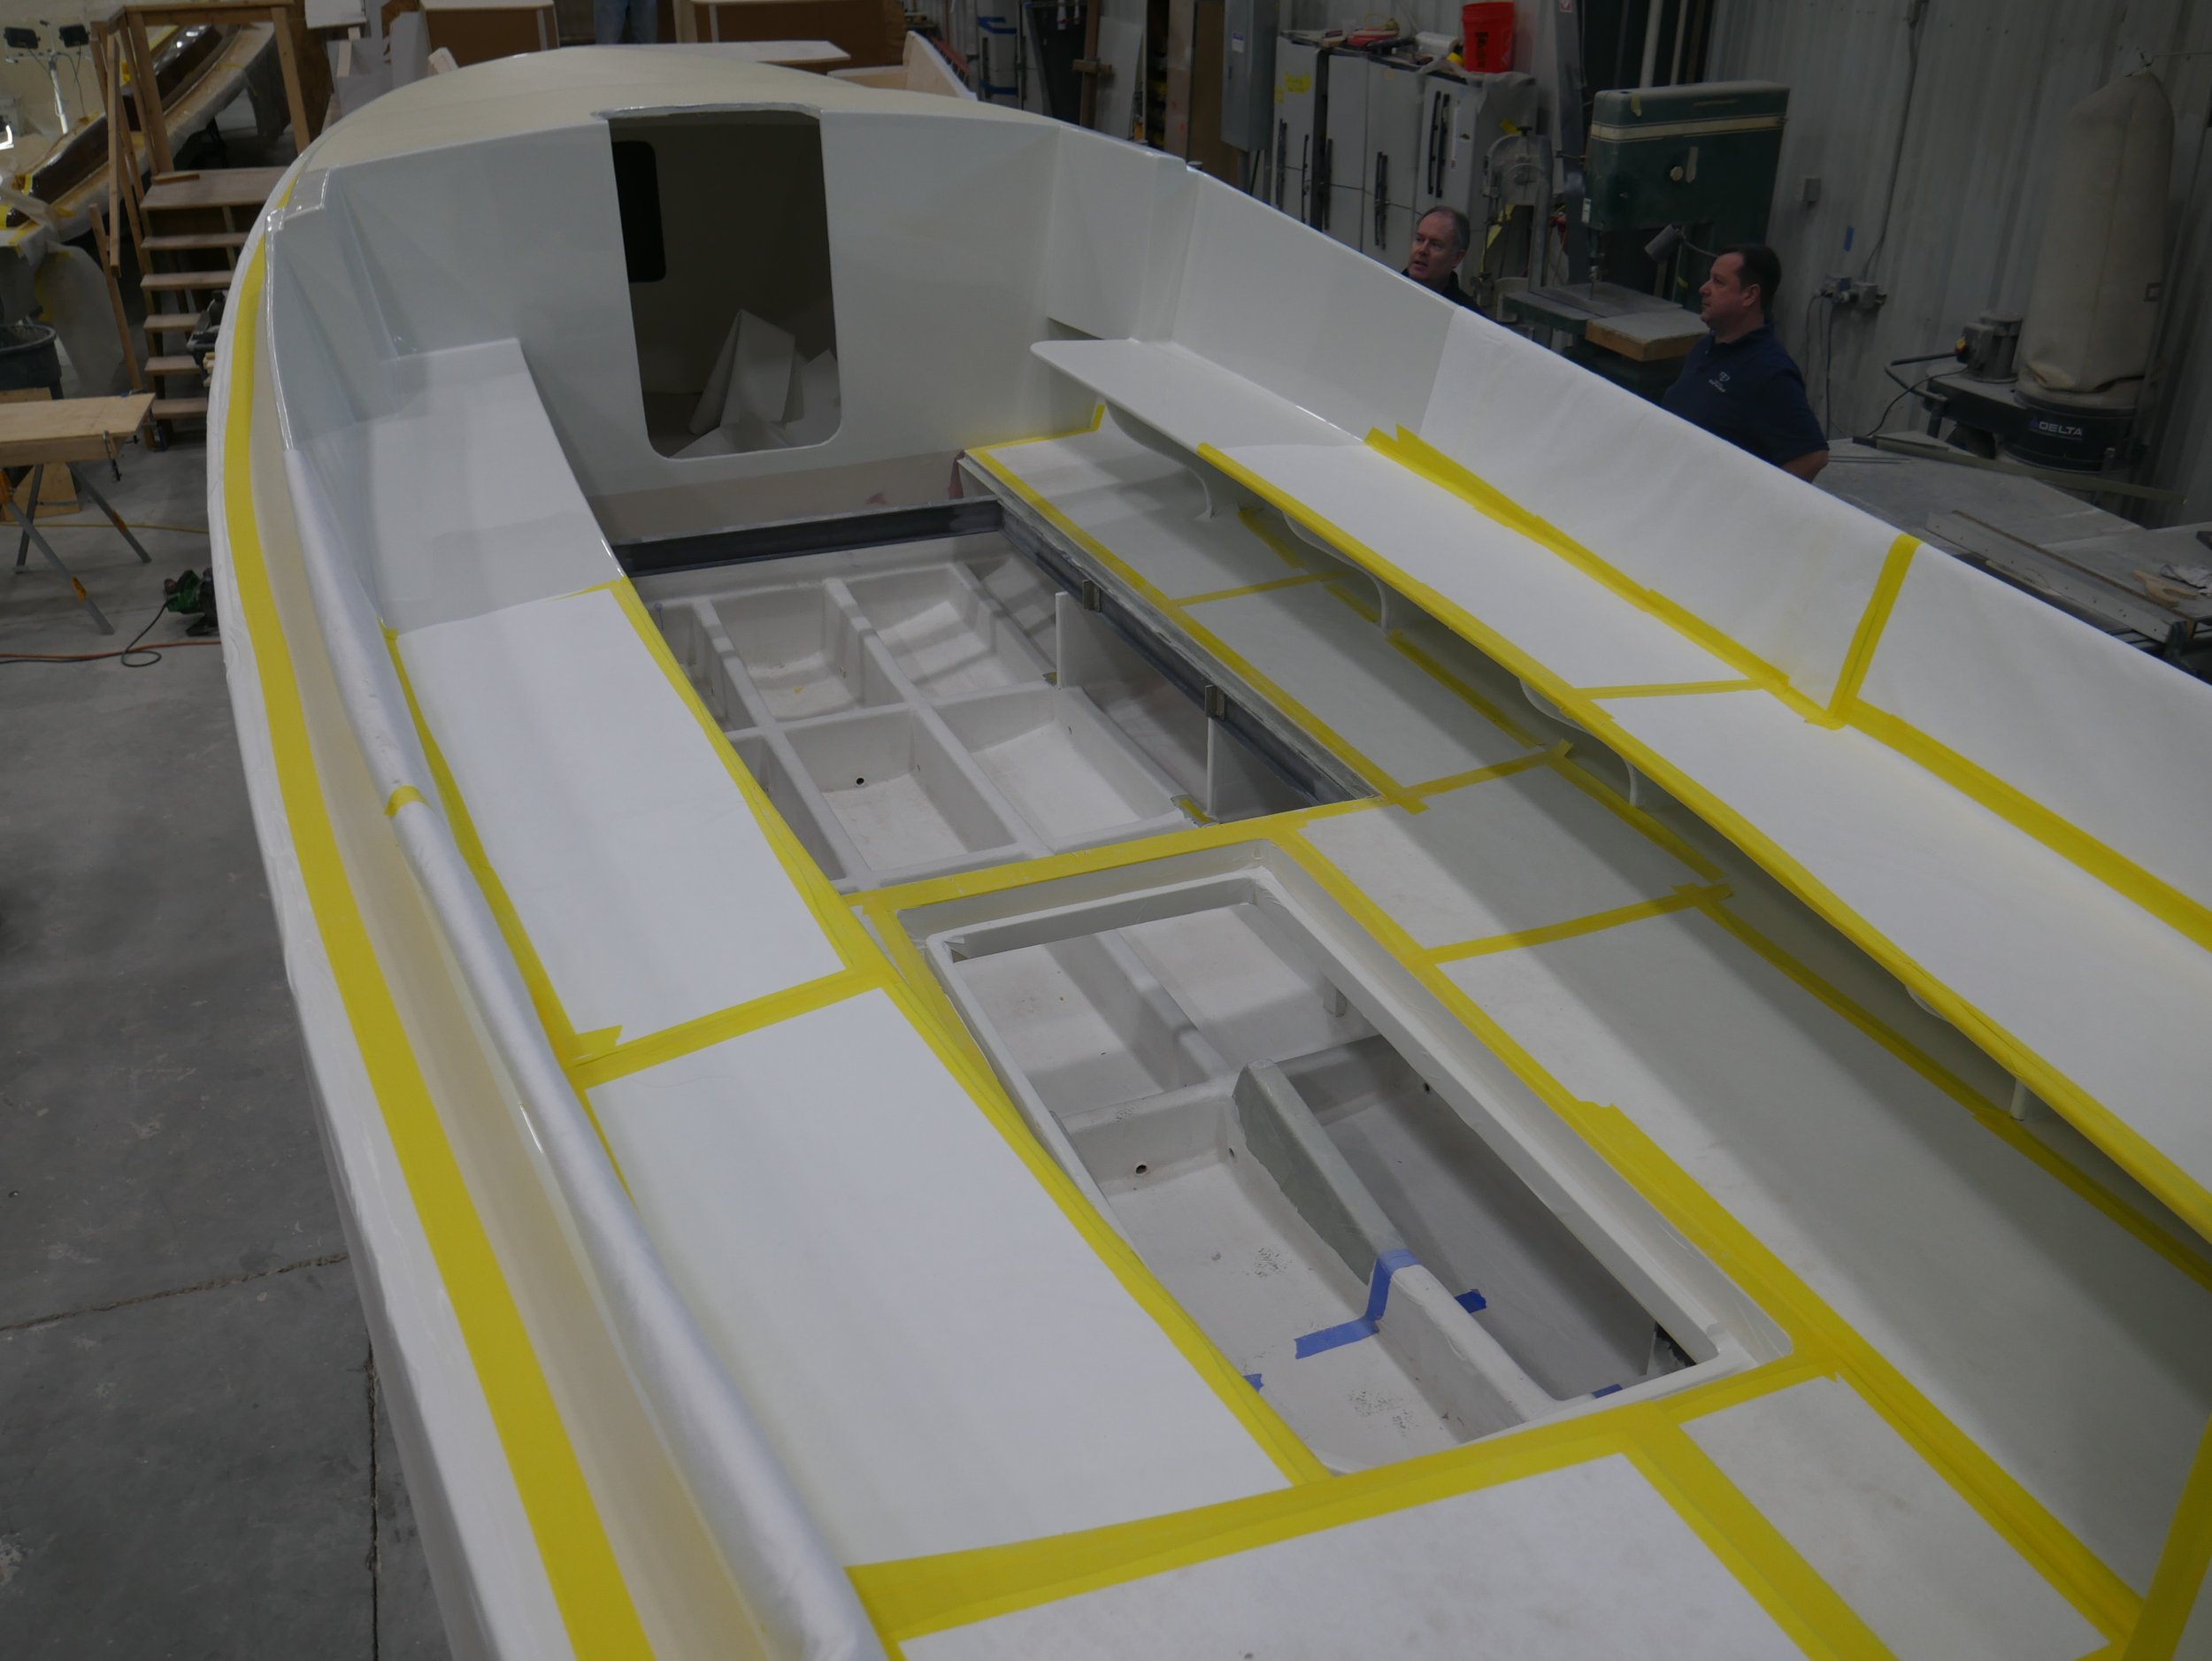    Boat cabin showing below deck areas where the HV battery set and motor will go.&nbsp; The bench seats will accommodate life jacket storage underneath.&nbsp; The yellow tape is securing felt paper to protect painted areas.   